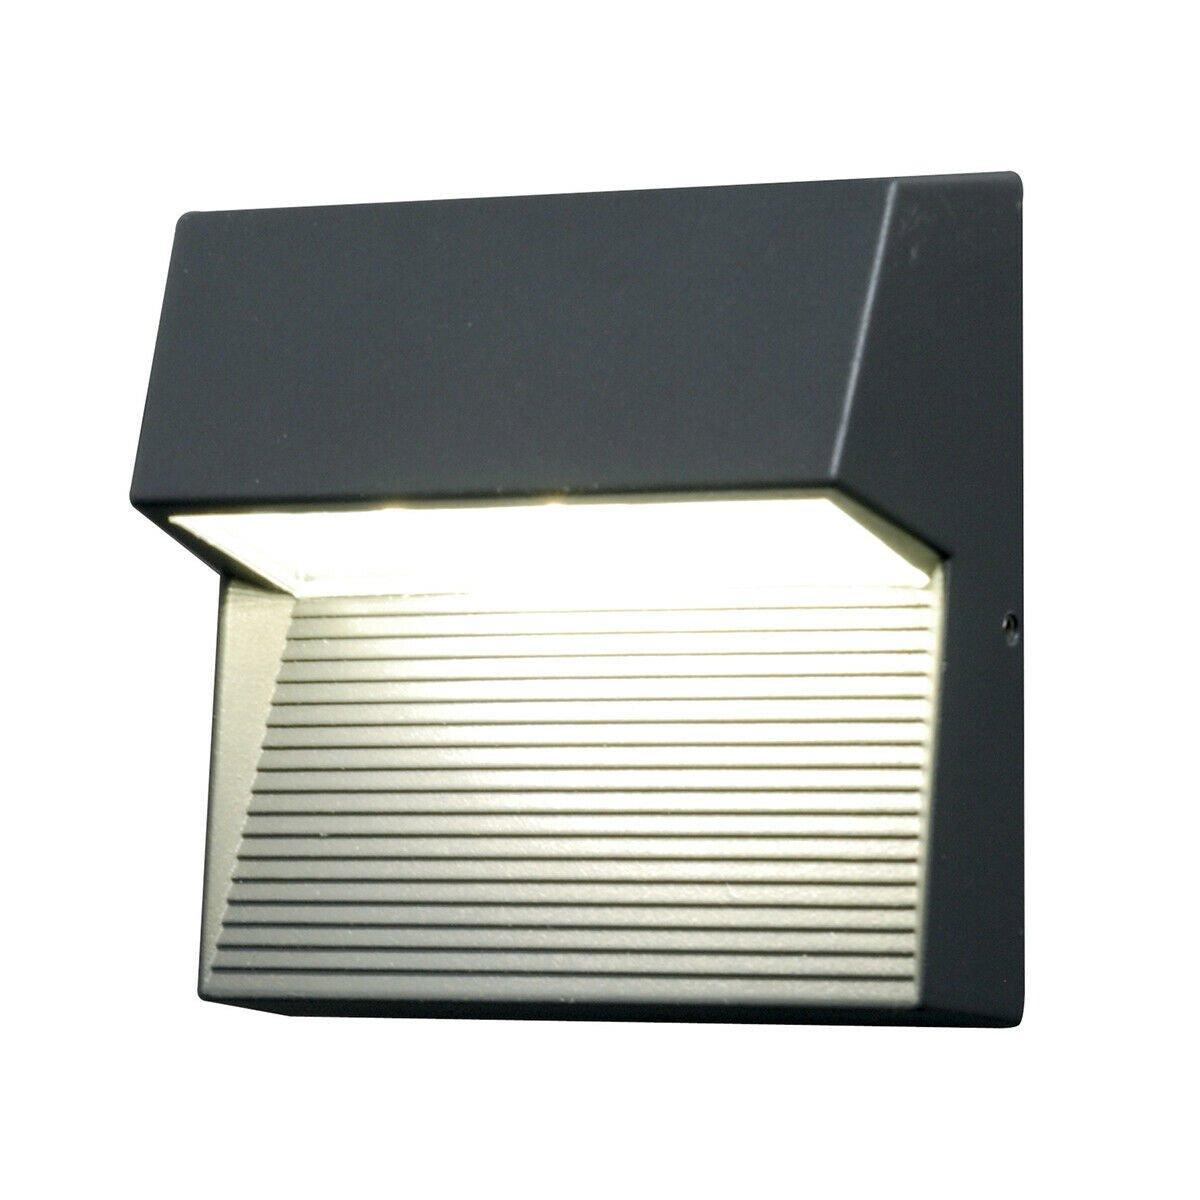 Outdoor IP54 Wall Light Sconce Graphite Finish LED 6W Bulb External d01053